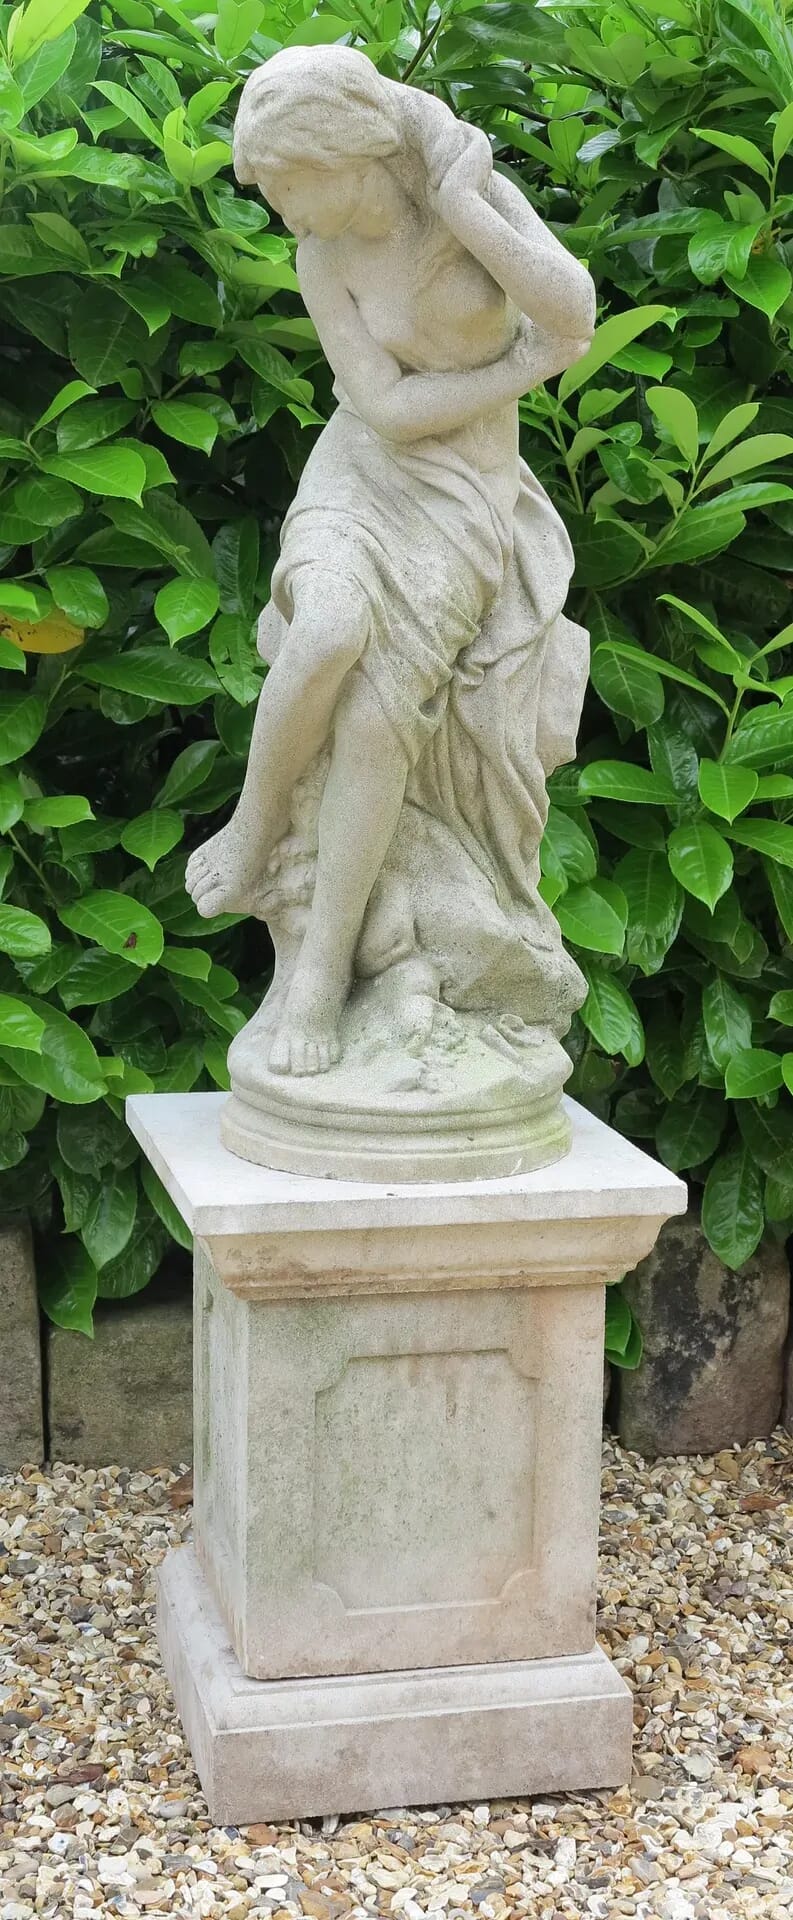 Antique garden statuary, ornaments and statues for sale